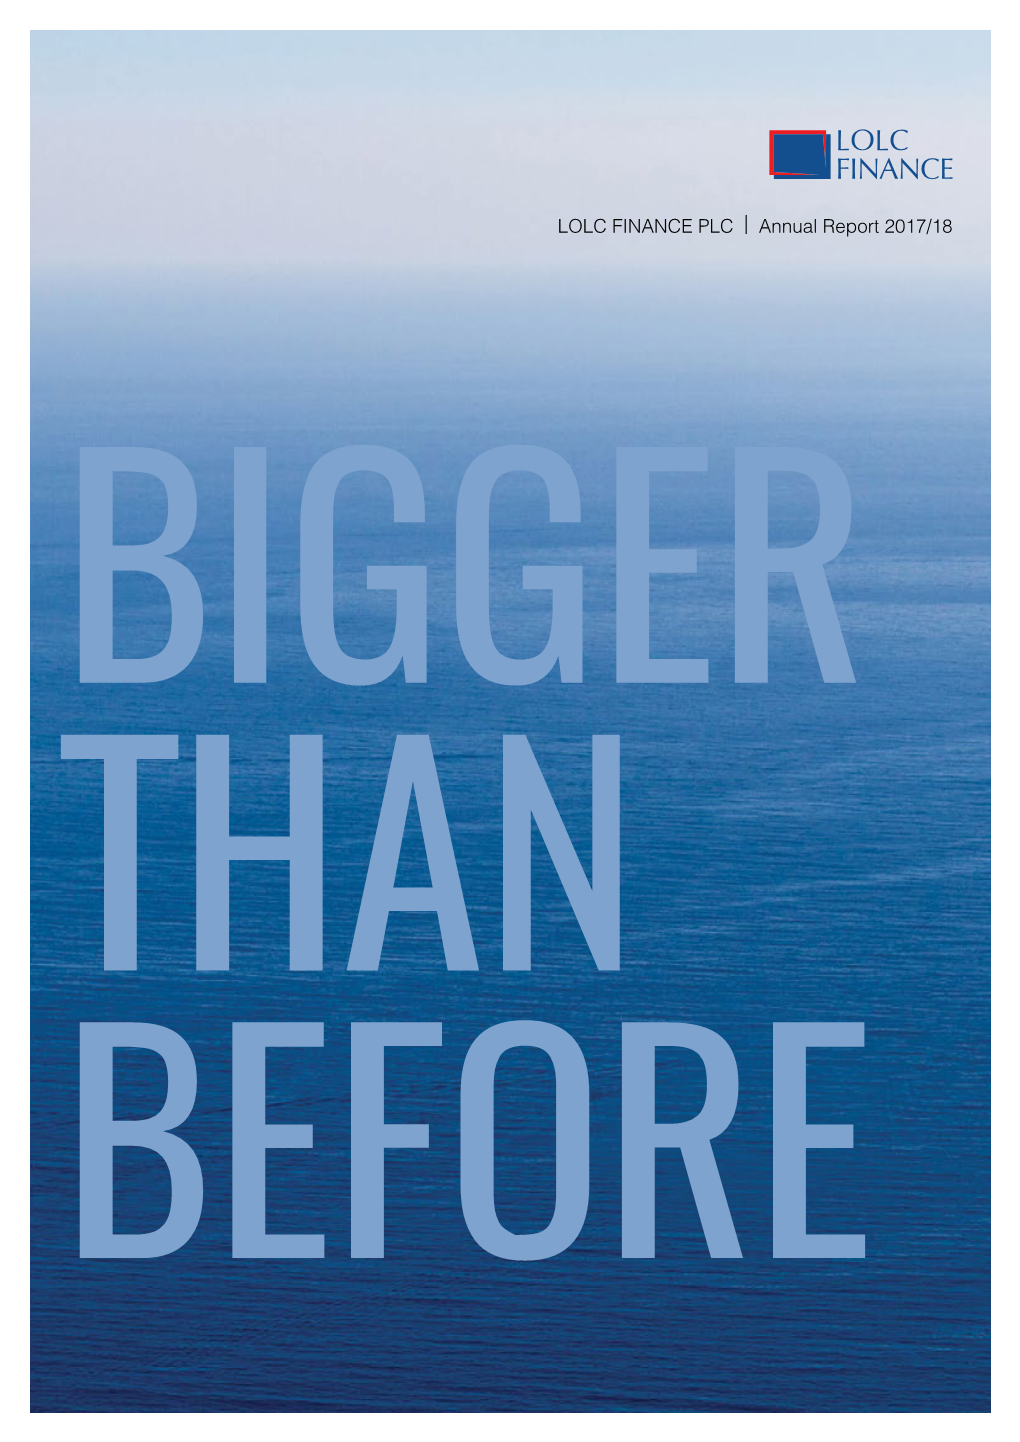 Annual Report 2017/18 BIGGER THAN BEFORE BIGGER THAN BEFORE the Sheer Scale and Magnitude of the Ocean Is Immense, and the Potential That Lies Within, Even More So